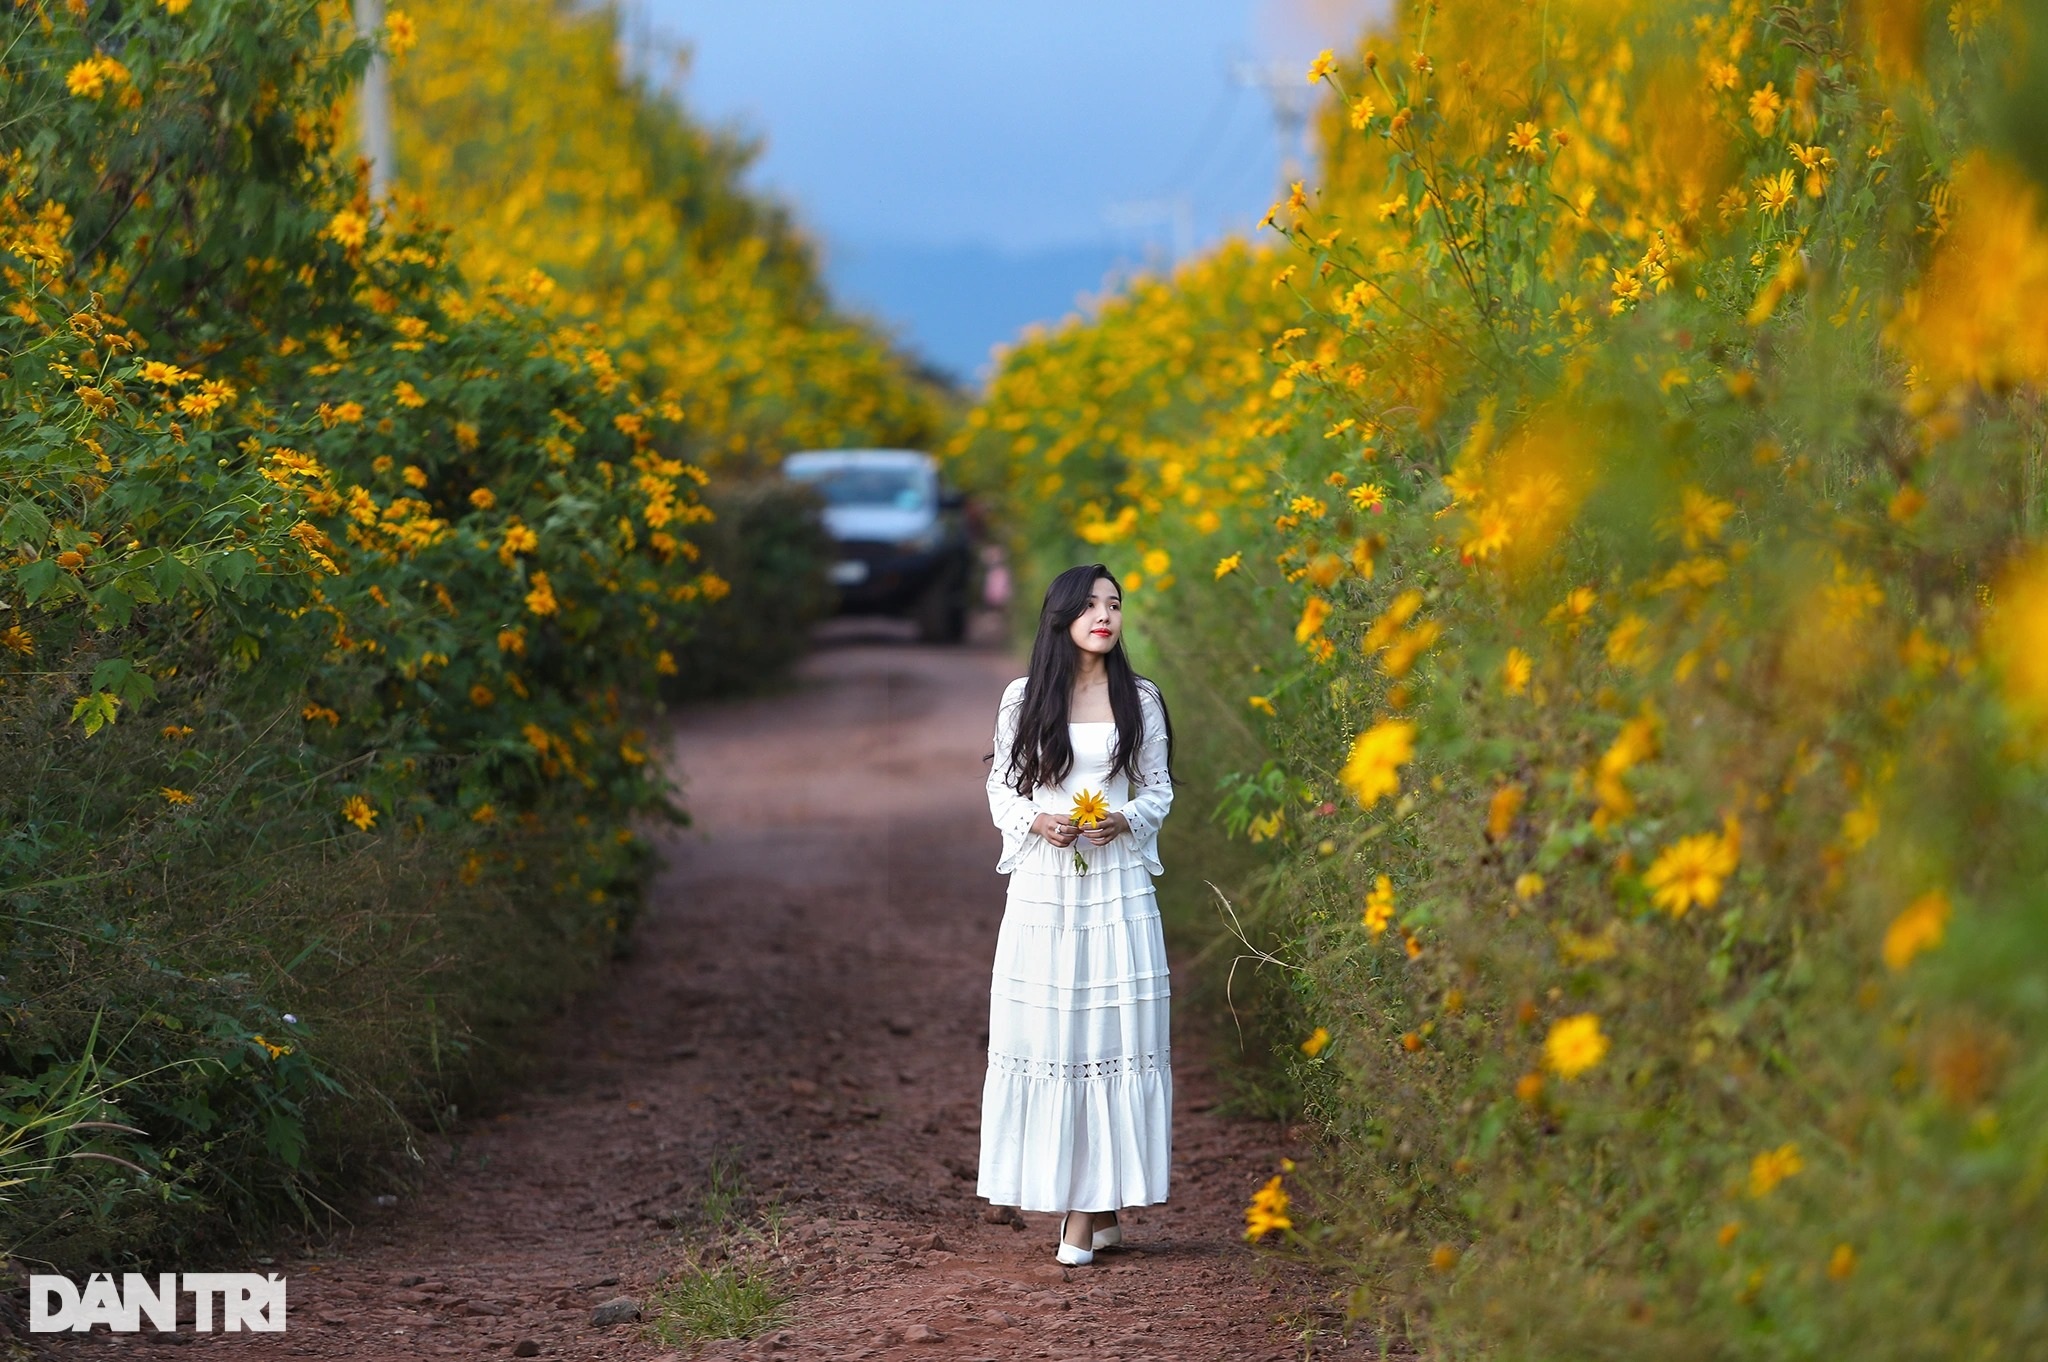 Wild sunflowers bloom on the hillside, young people flock to the outskirts of Da Lat to check-in - 1